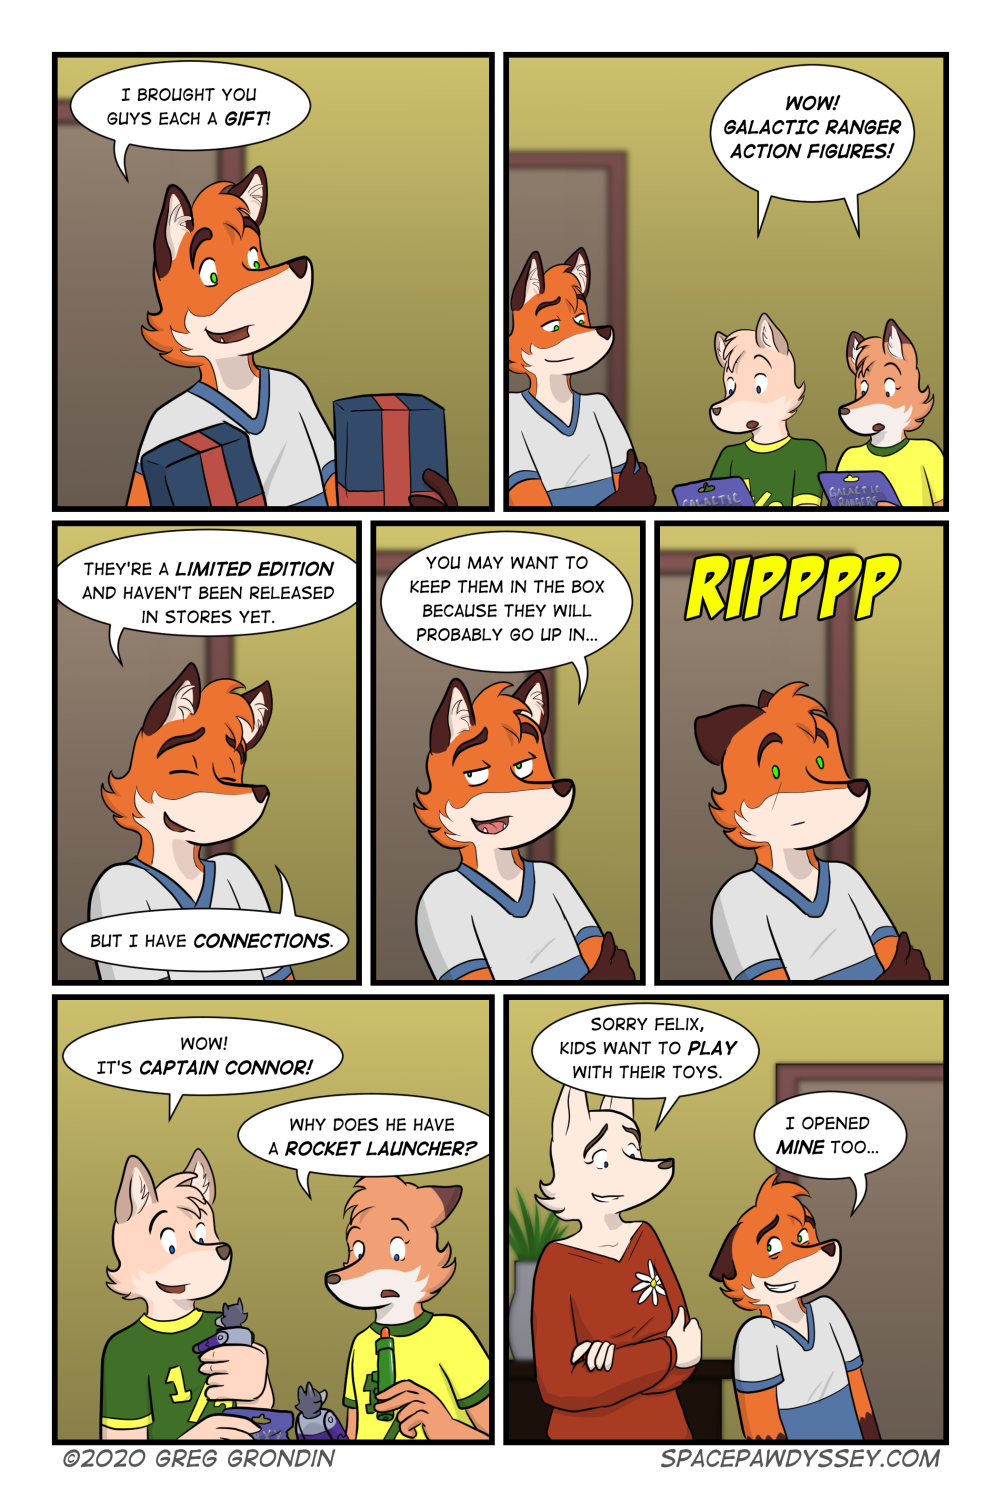 Space Pawdyssey #397